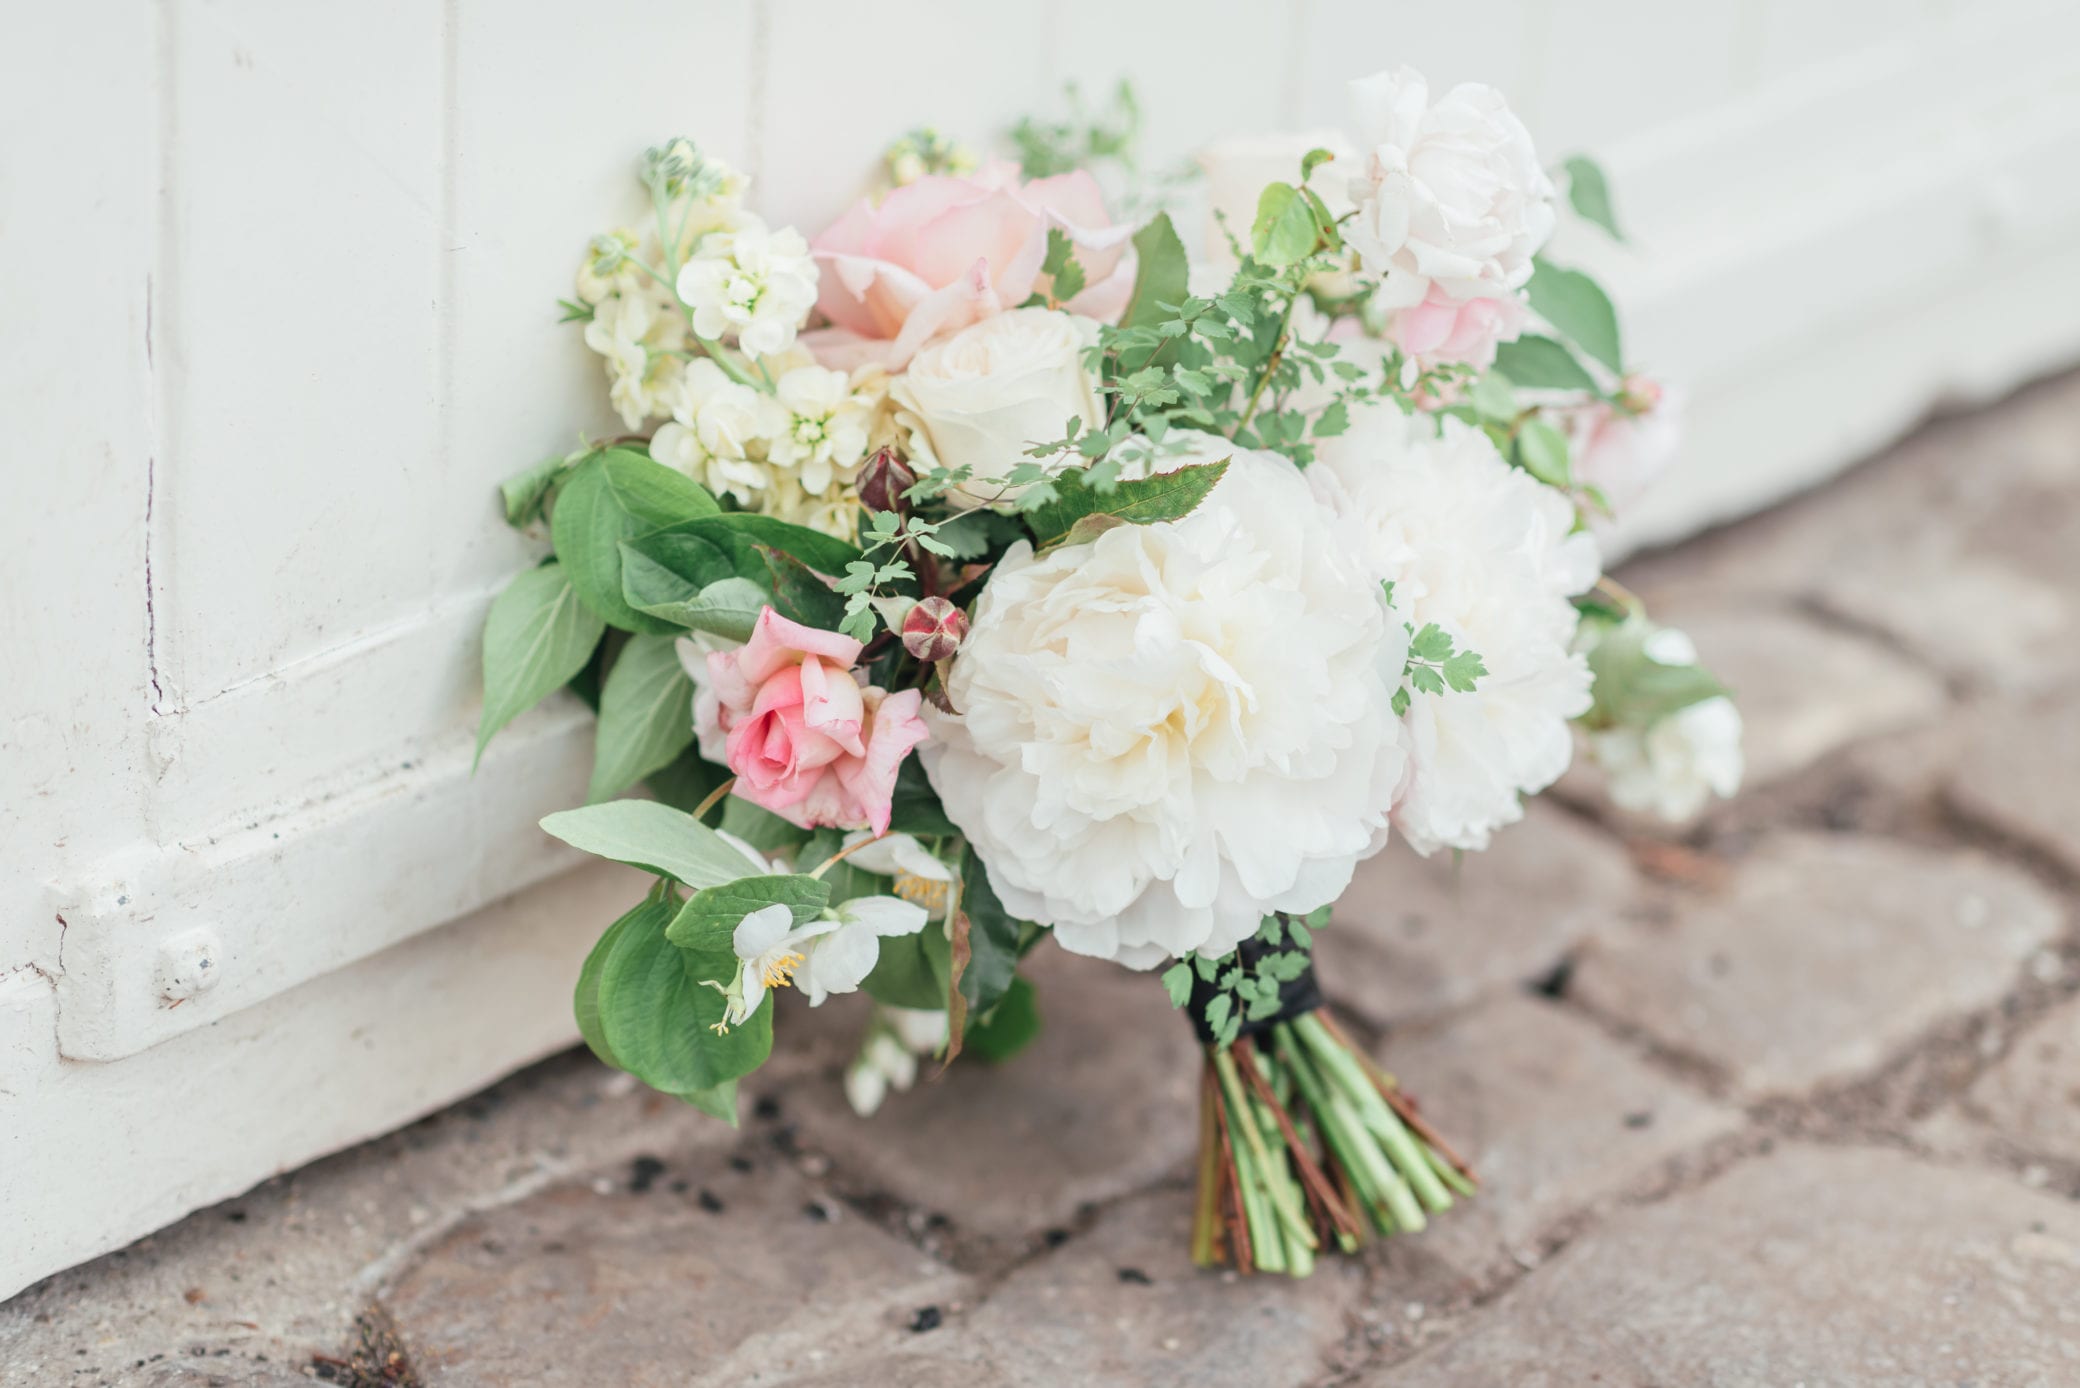 Spring wedding flowers for the bride